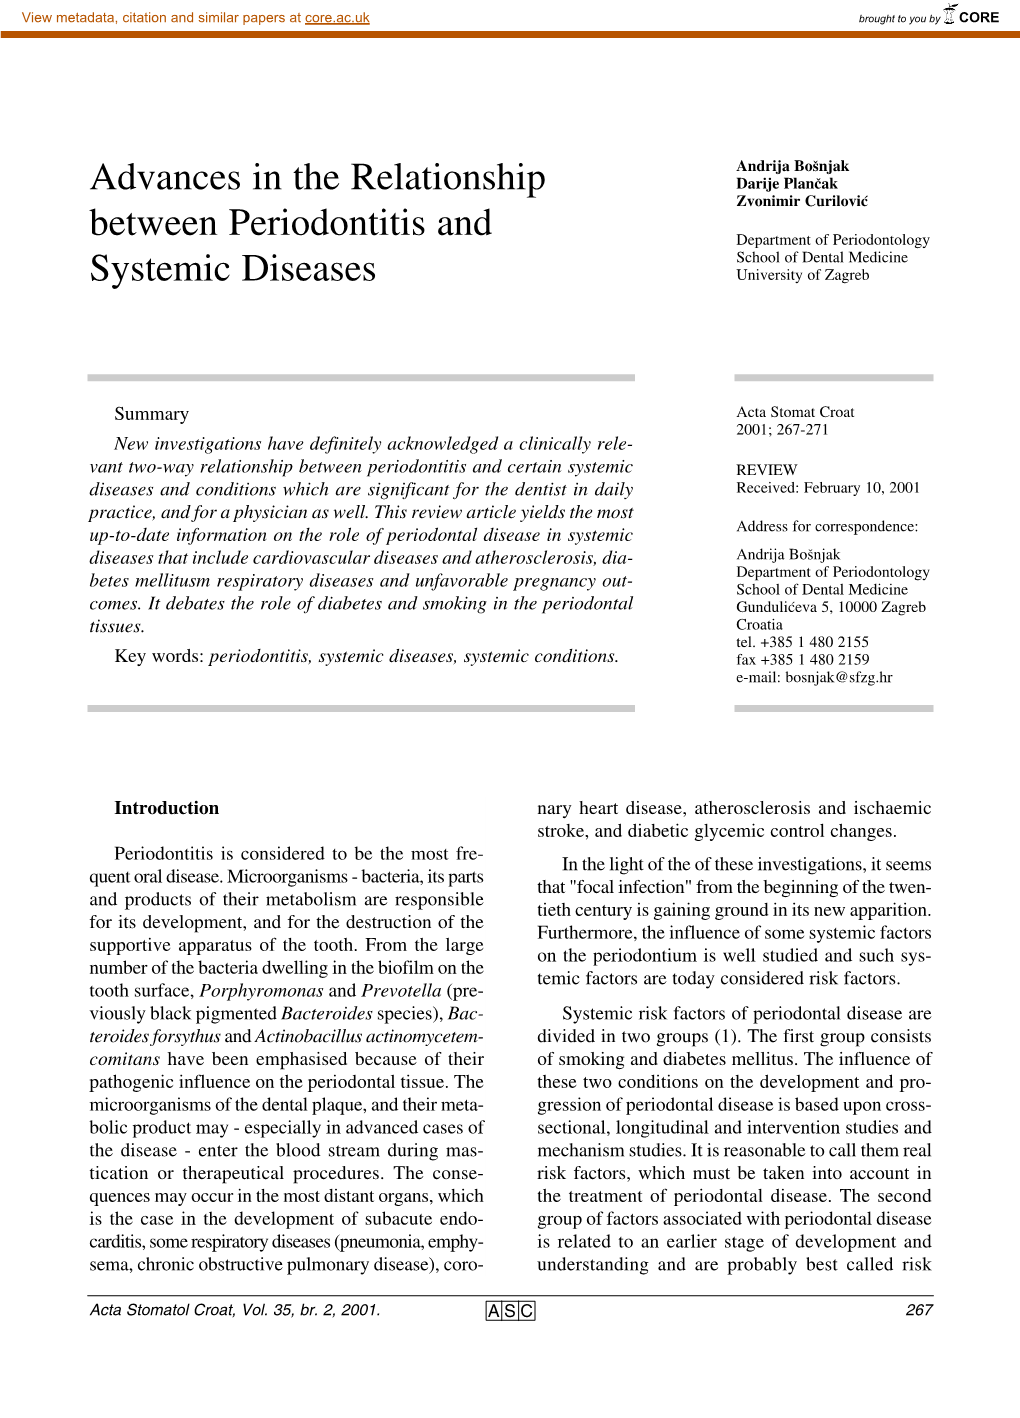 Advances in the Relationship Between Periodontitis and Systemic Diseases